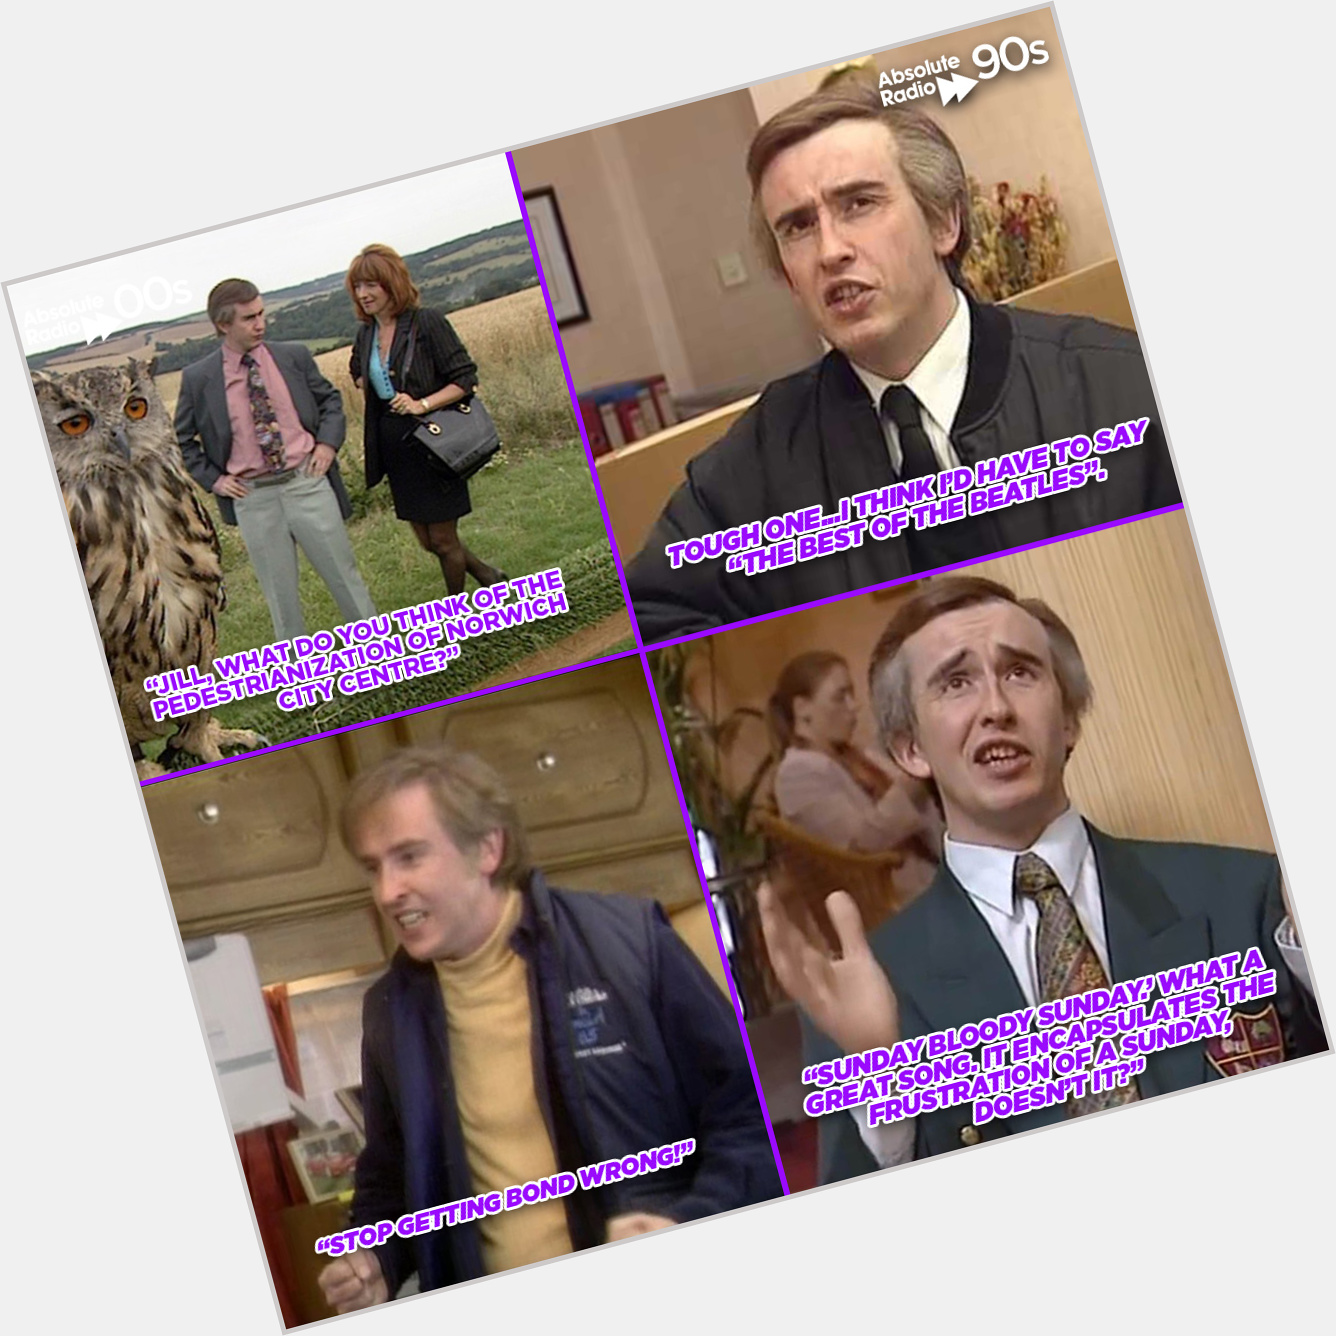 Best Partridge quote?

Today is the 57th birthday of the brilliant Steve Coogan, happy birthday Steve! 